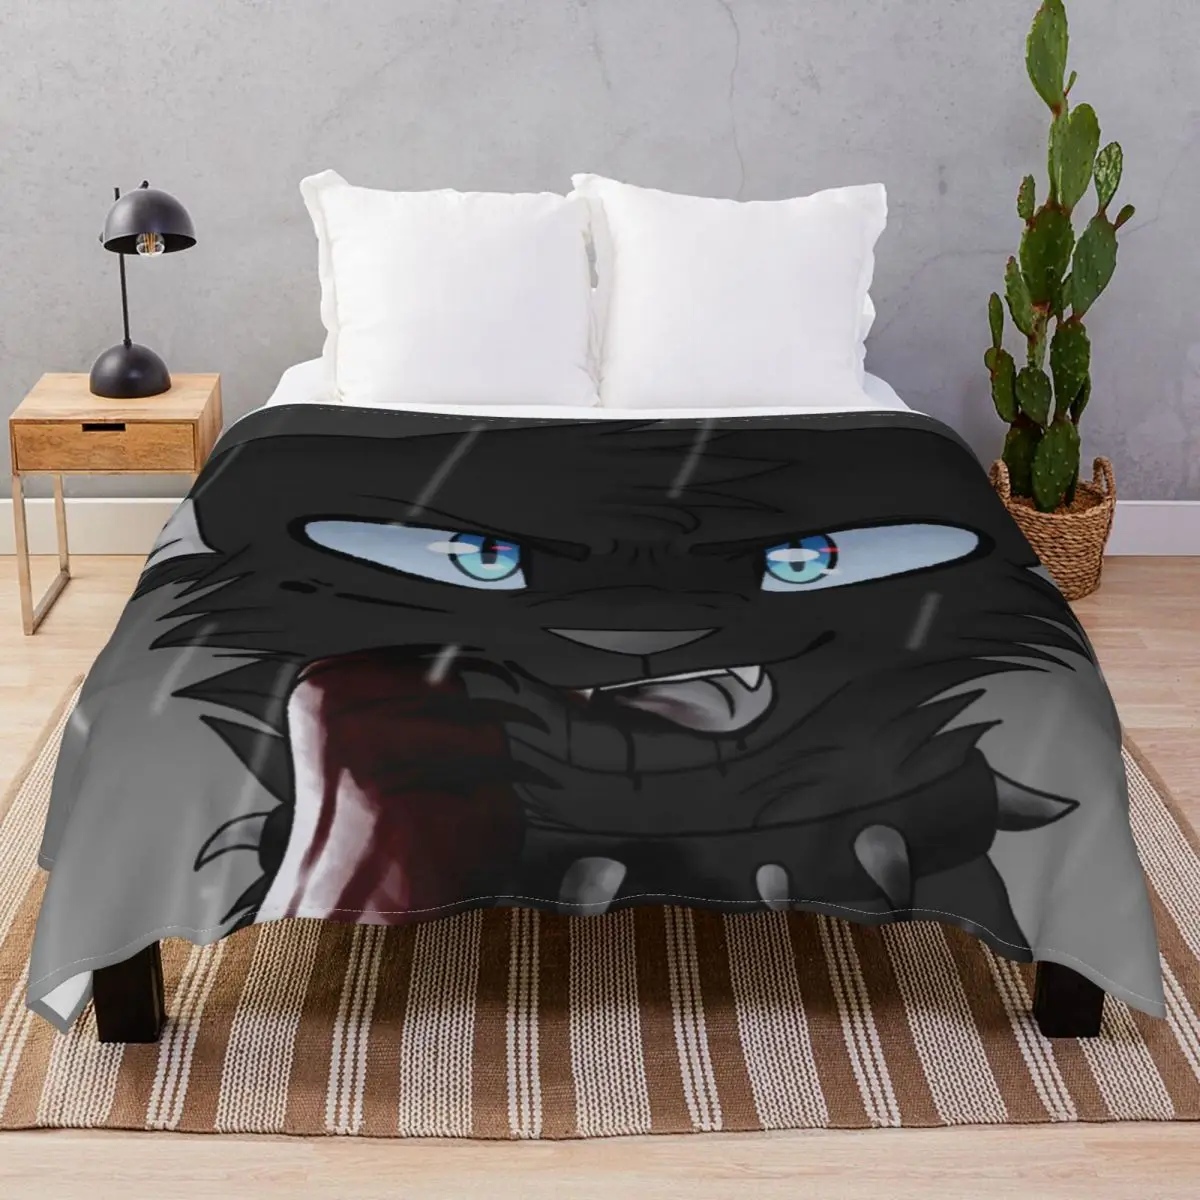 Scourge Blanket Fleece Spring Autumn Ultra-Soft Unisex Throw Blankets for Bedding Home Couch Travel Cinema